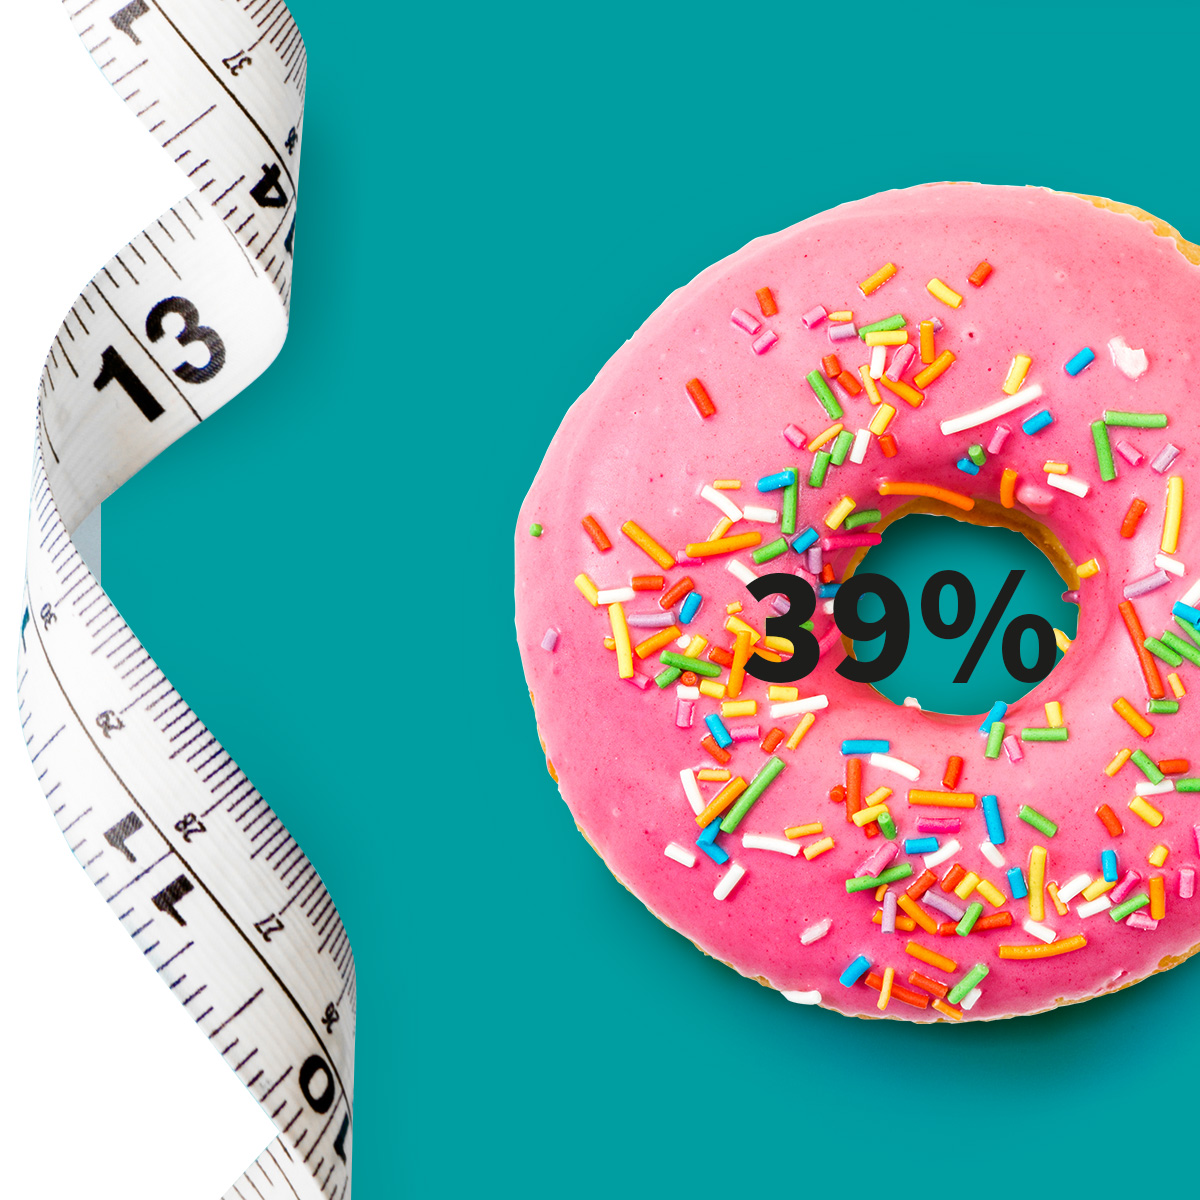 [.AT-de Austria (german)] [.DE-de Germany (german)] •	A measuring tape and a doughnut with pink icing and colourful sugar sprinkle as a metaphor for obesity